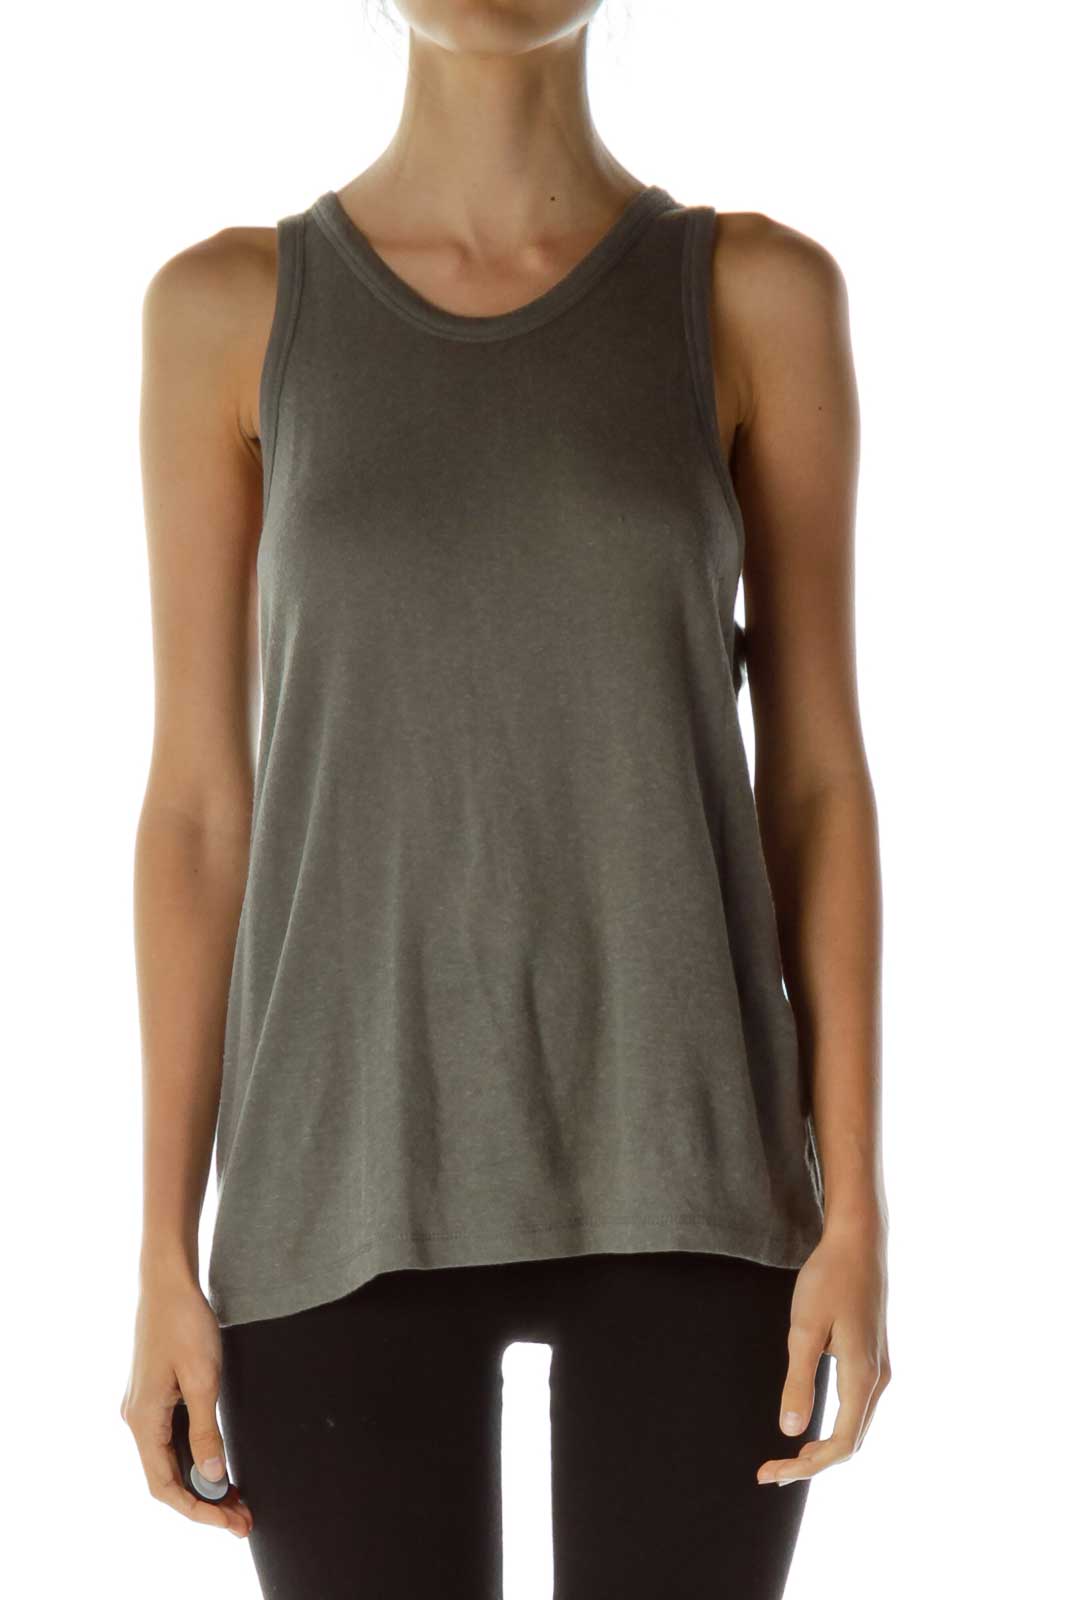 Gray Knit Racerback Tank Top Front